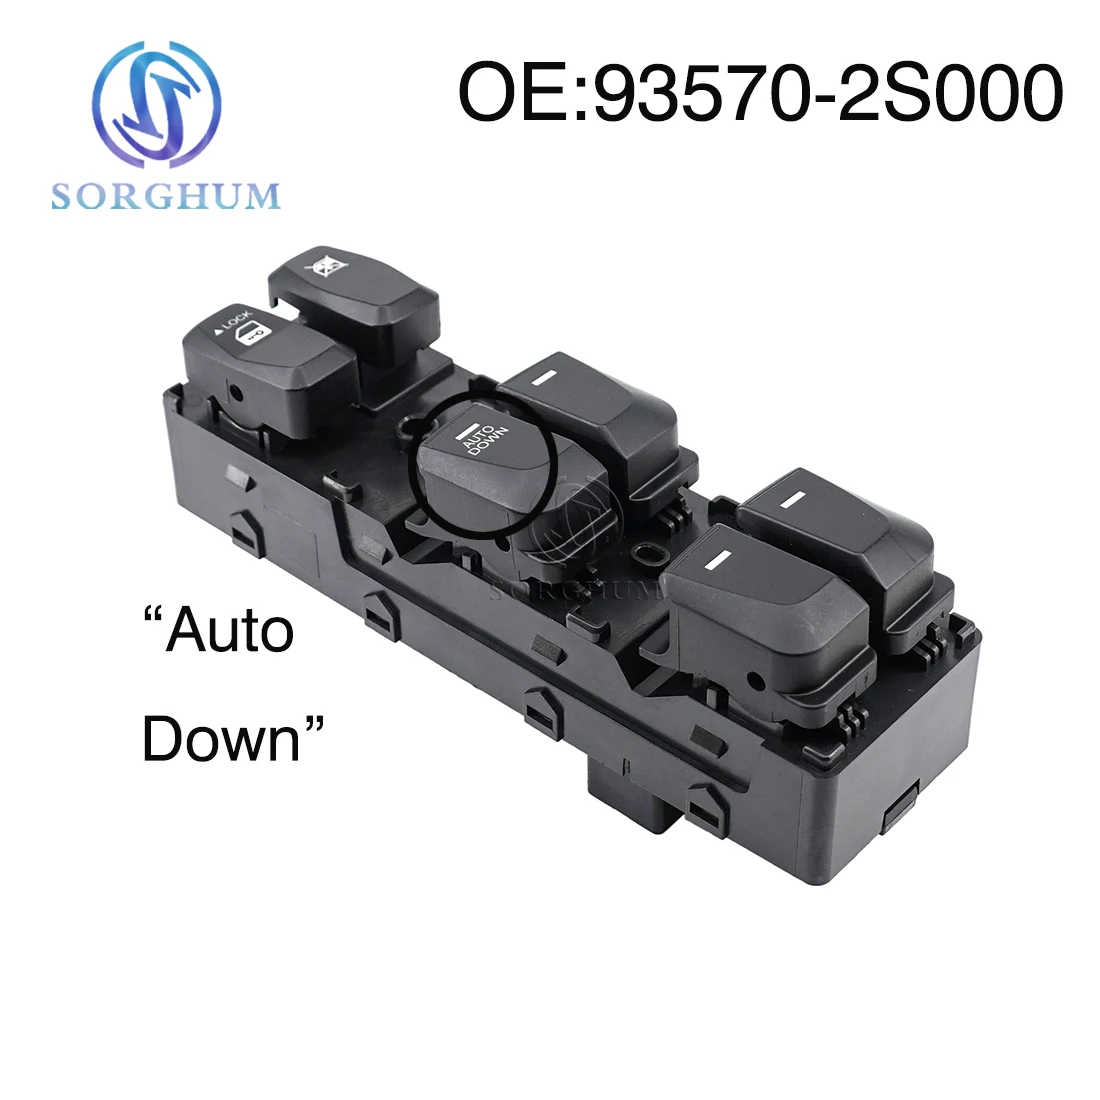 

Sorghum For Hyundai IX35 TUCSON 10-15 Electric Power Master Window Lifter Regulator Control Switch Button 935702S000 935712S000